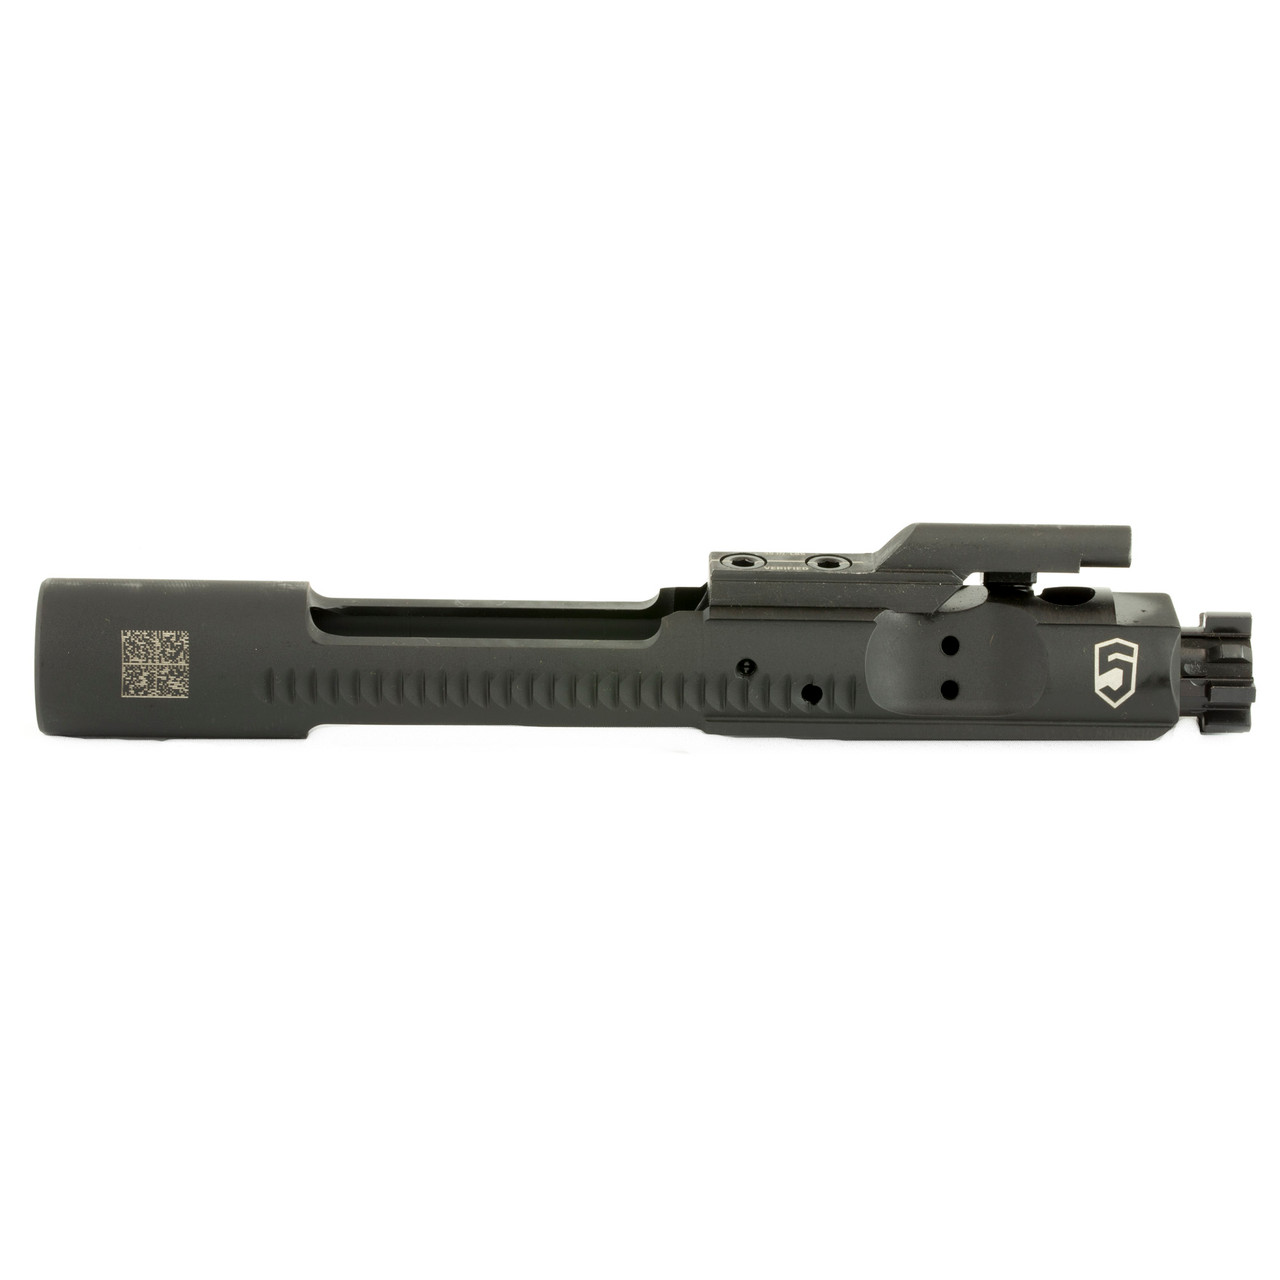 Phase 5 Weapon Systems BCG-M16 Bolt Carrier Group M16 Blk